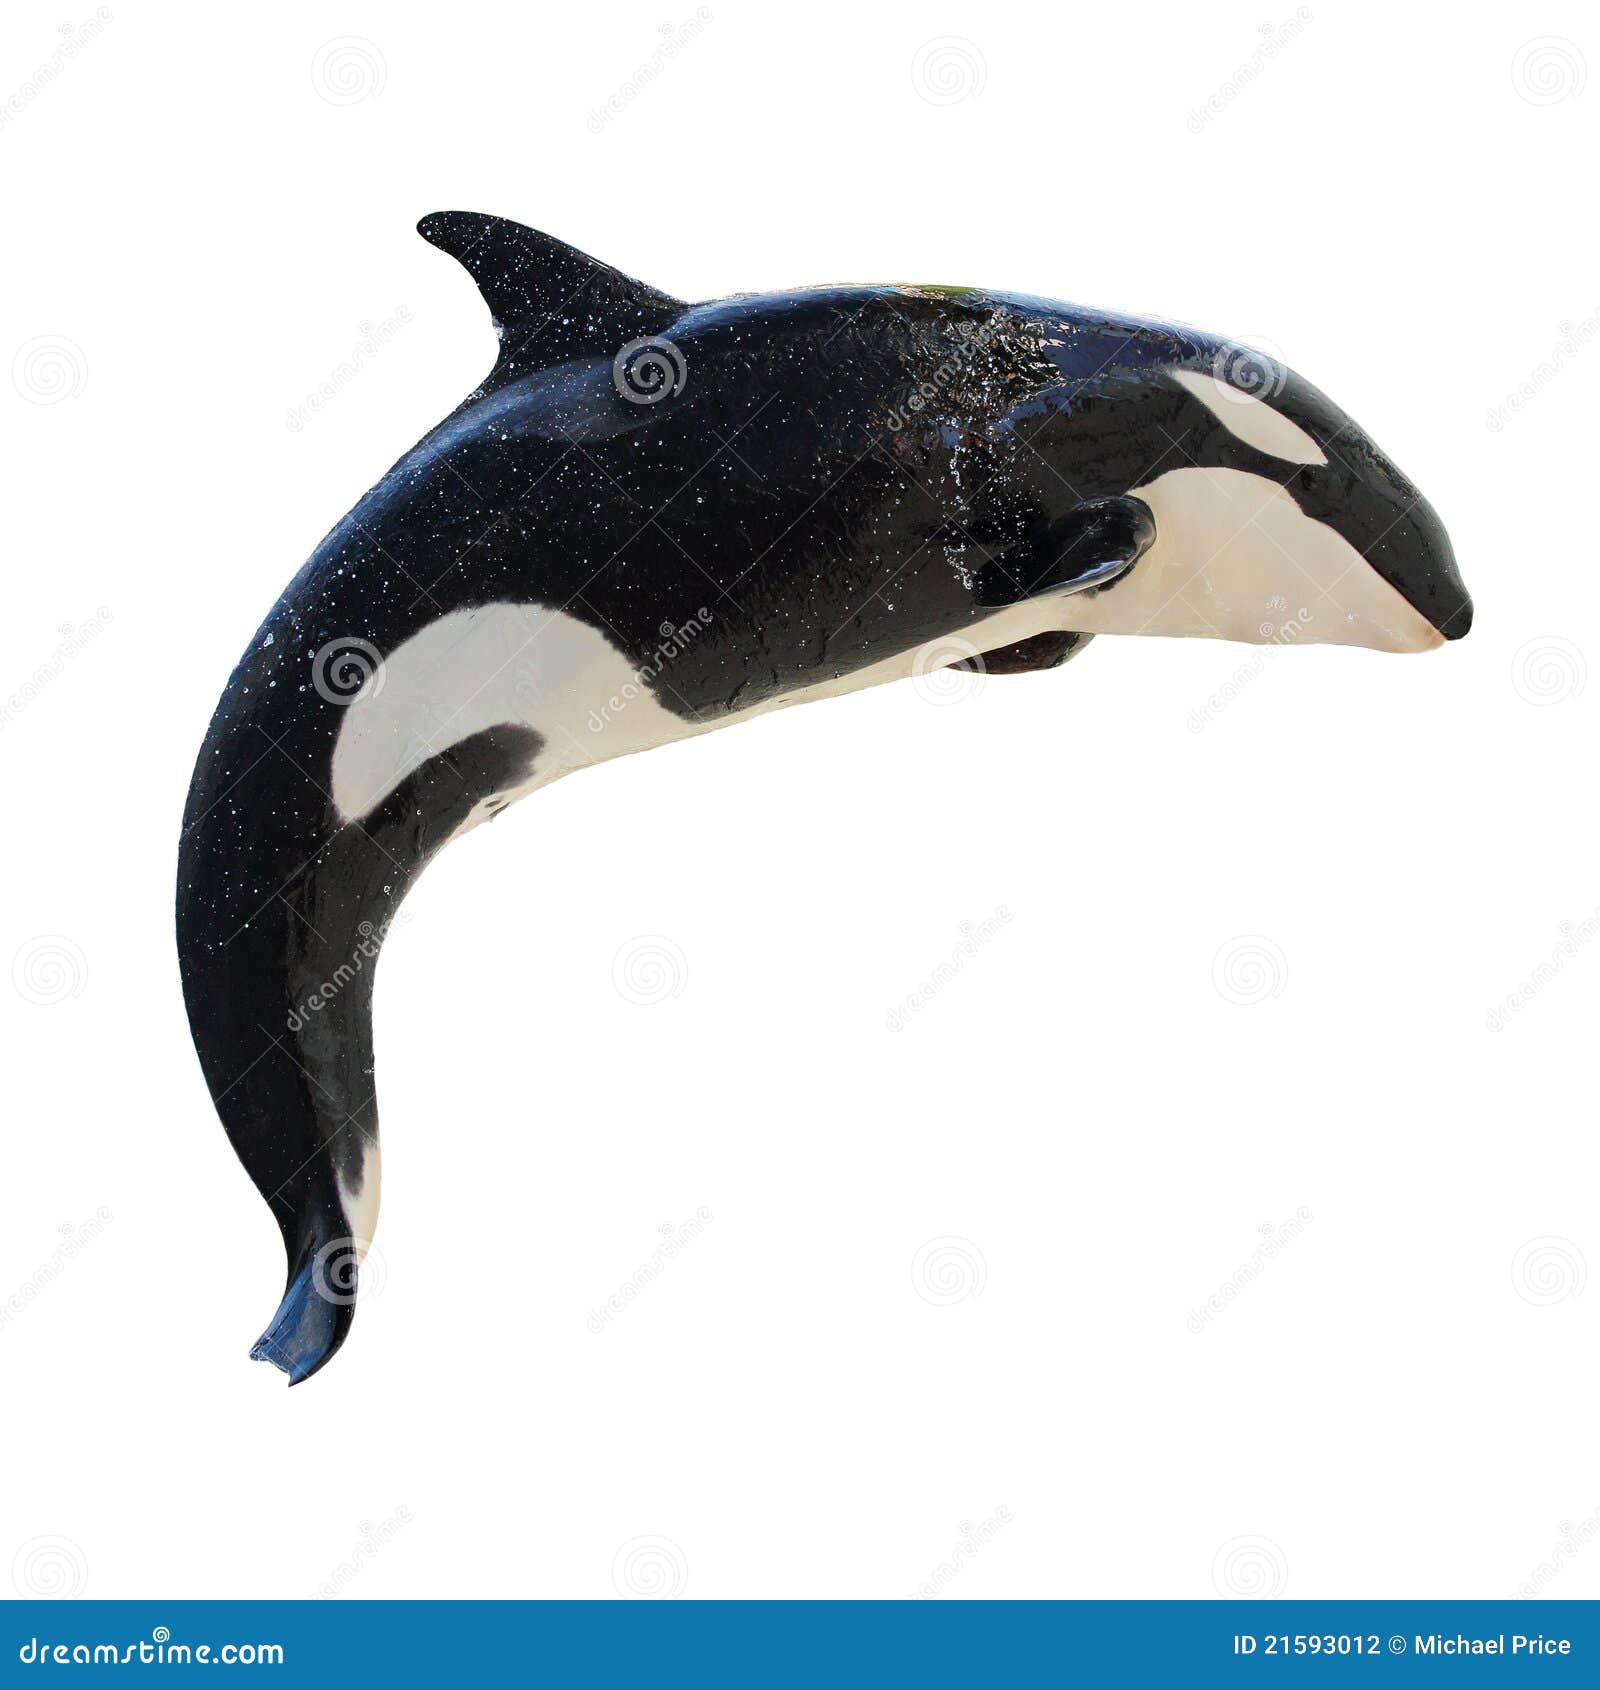 leaping killerwhale, orcinus orca